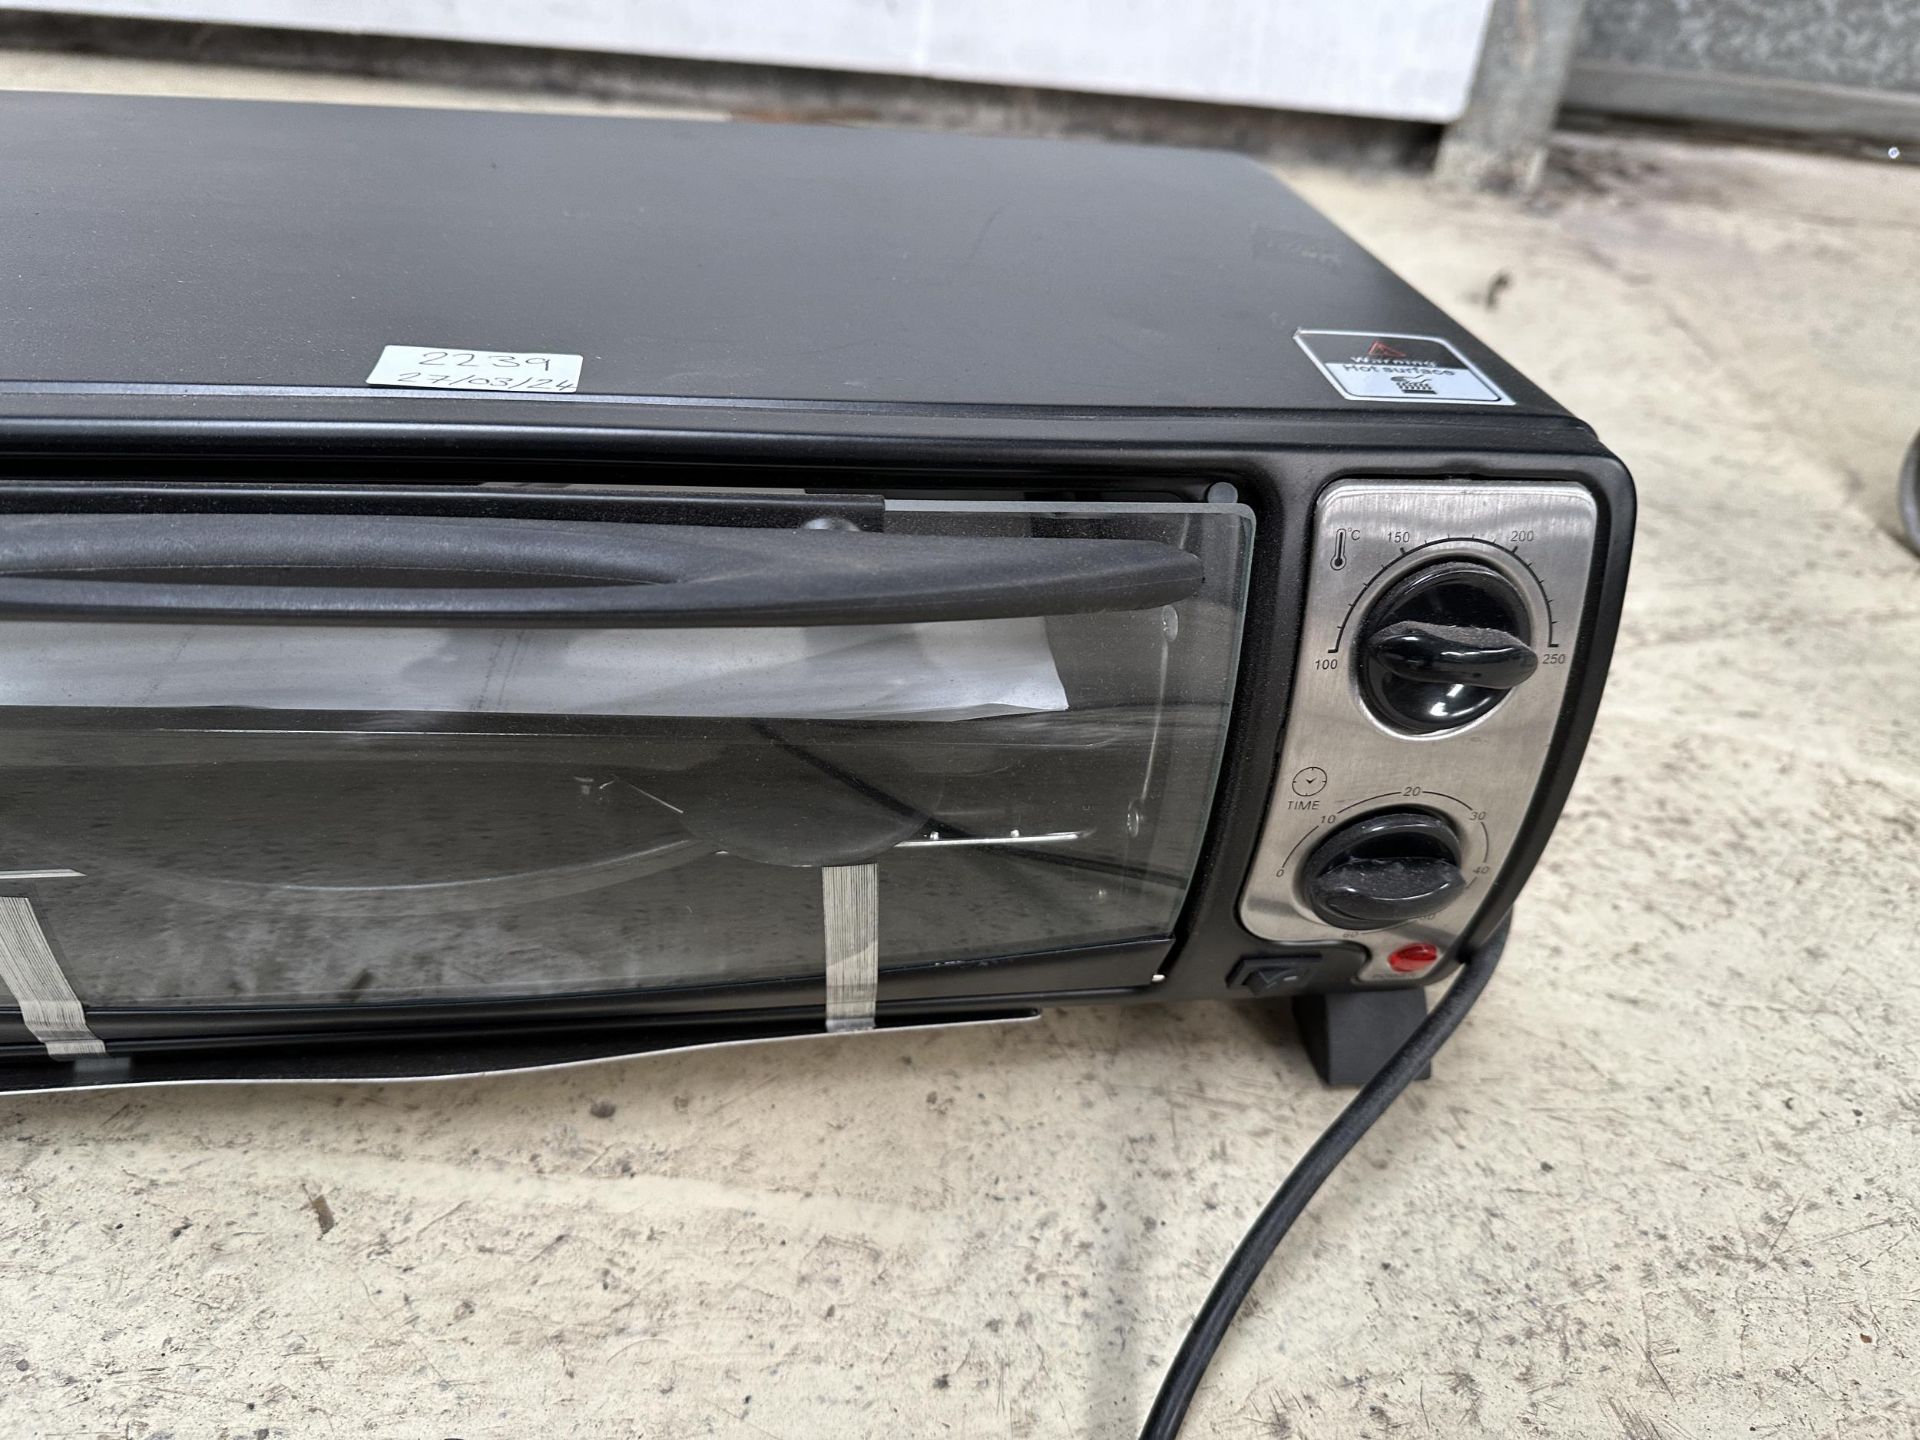 TWO COUNTER TOP MINI OVEN AND GRILLS - BELIEVED UNUSED - Image 2 of 4